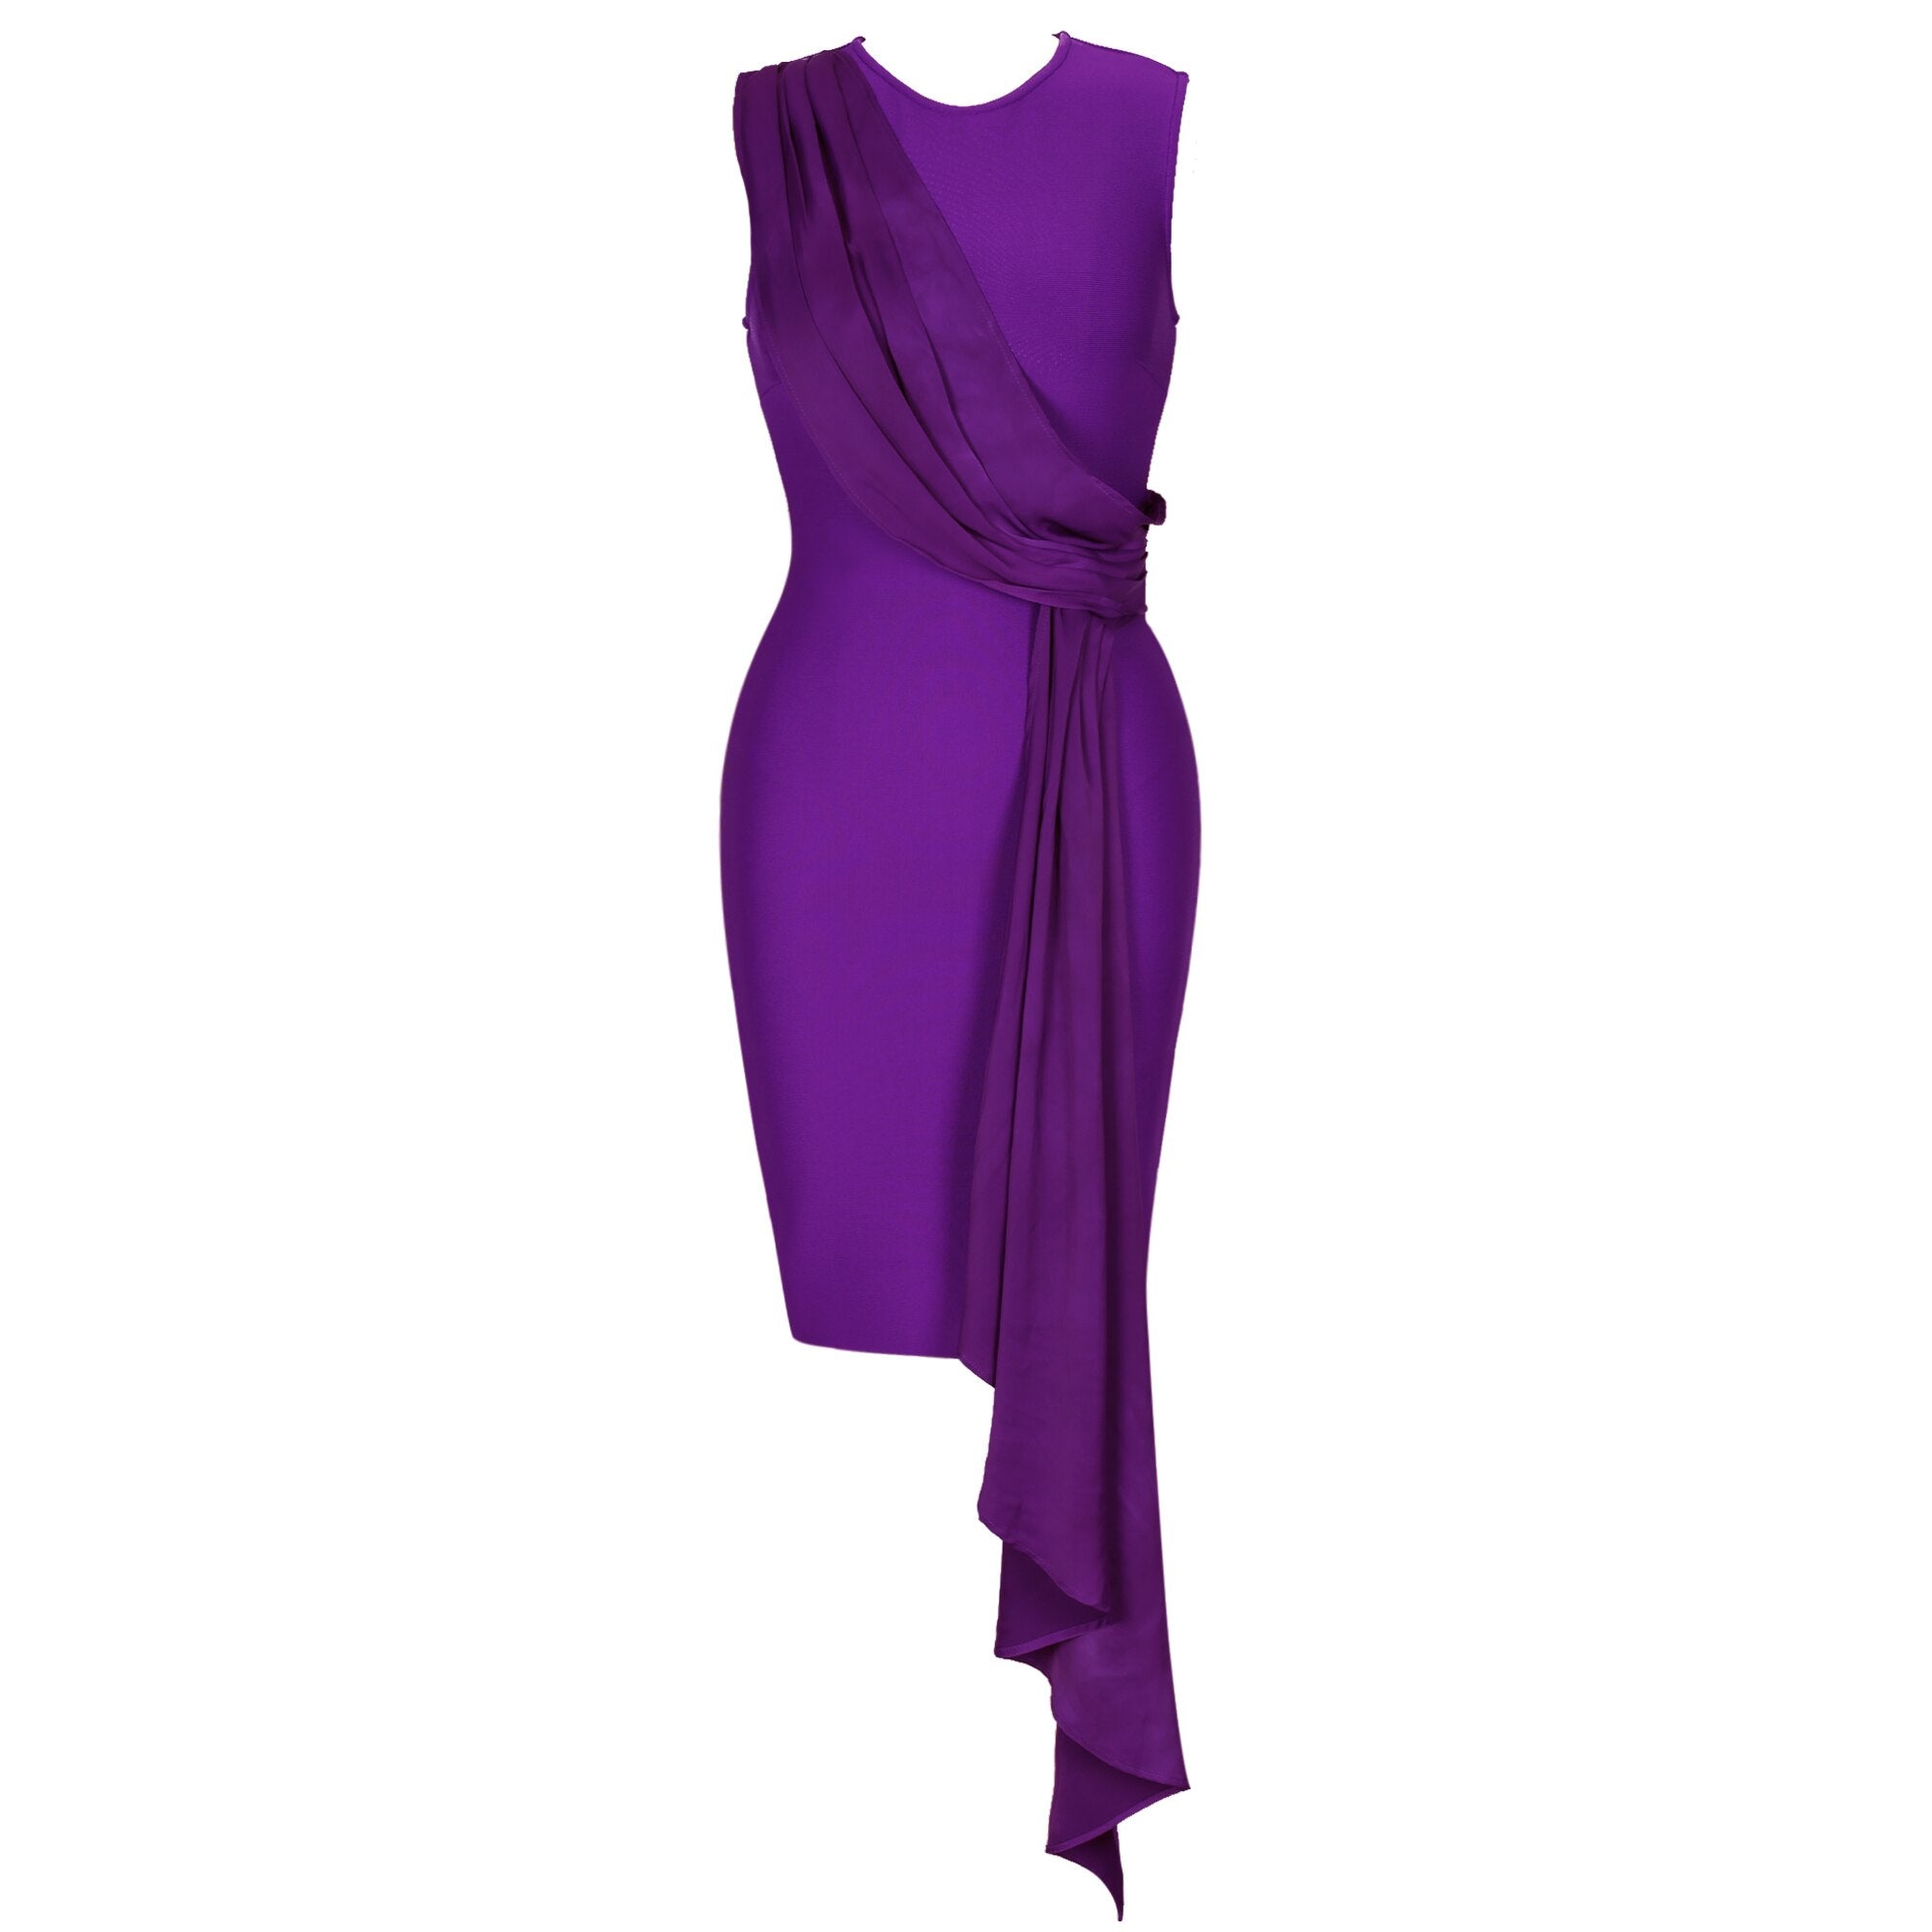 Bandage Dress 2021 New Arrivals Purple Bandage Dress Bodycon Summer Women Sexy Party Dress Evening Birthday Club Outfits